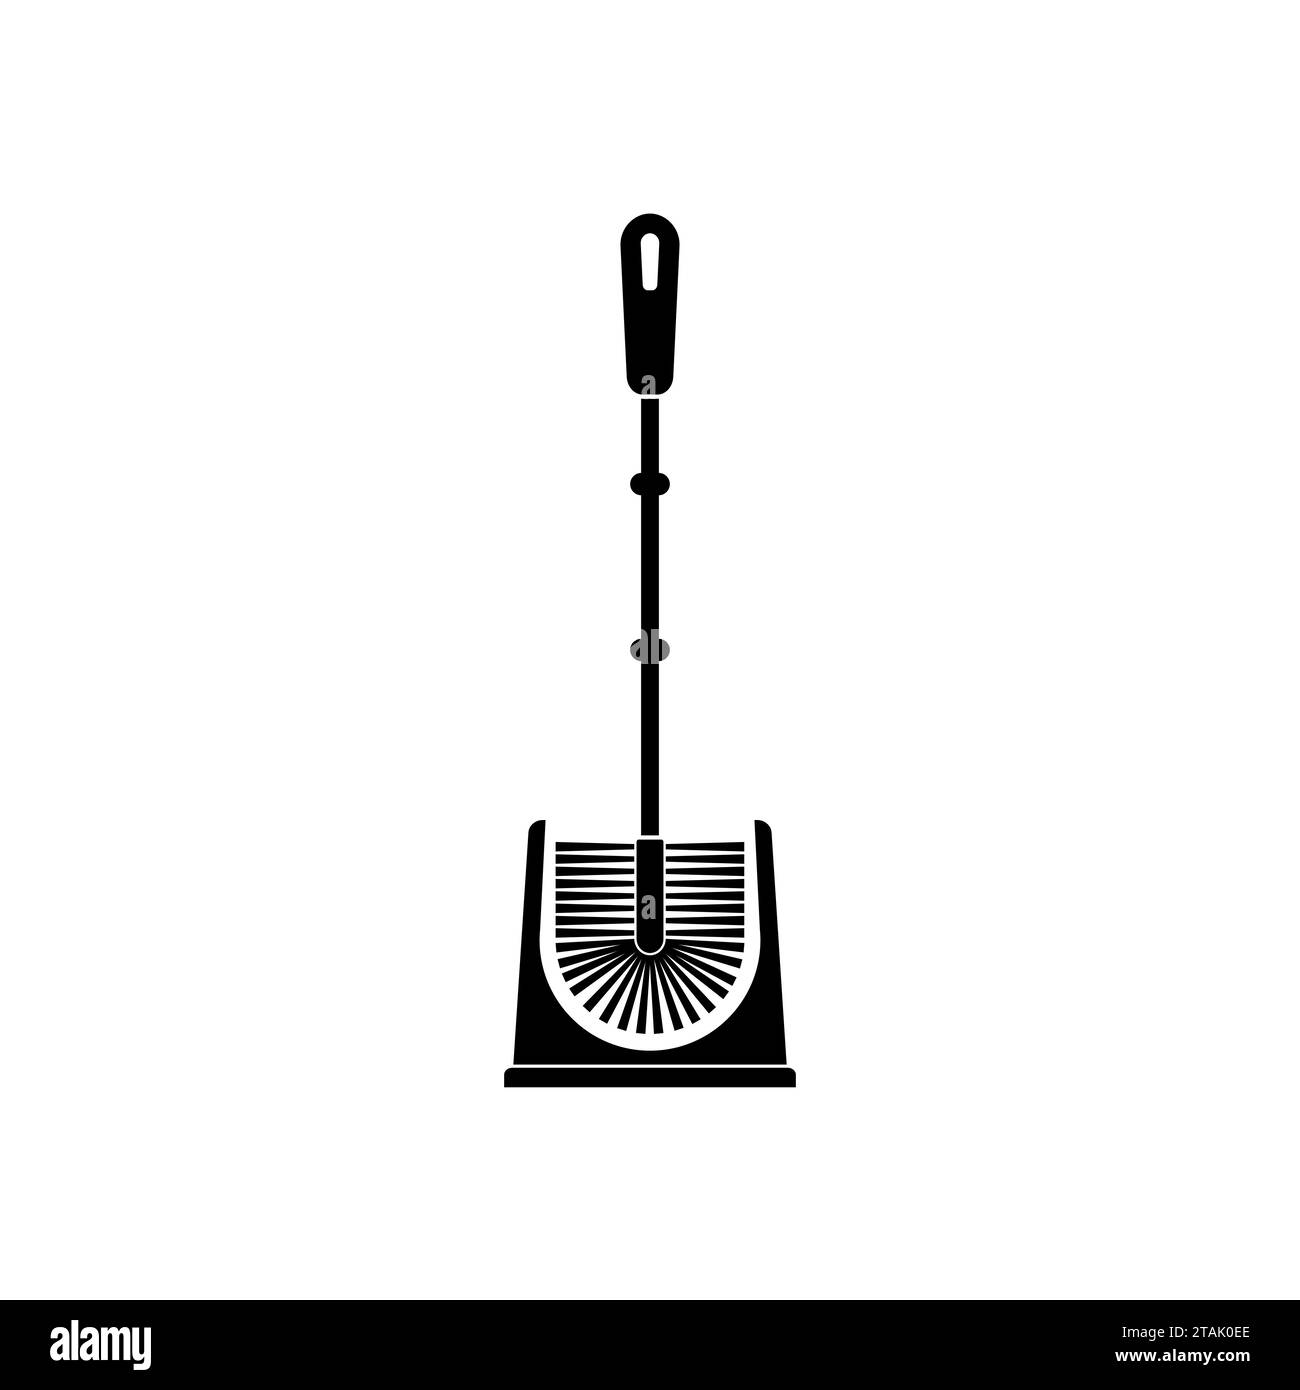 Toilet brush icon isolated on white background. A tool for cleaning the toilet and other plumbing equipment. Vector illustration. Stock Vector